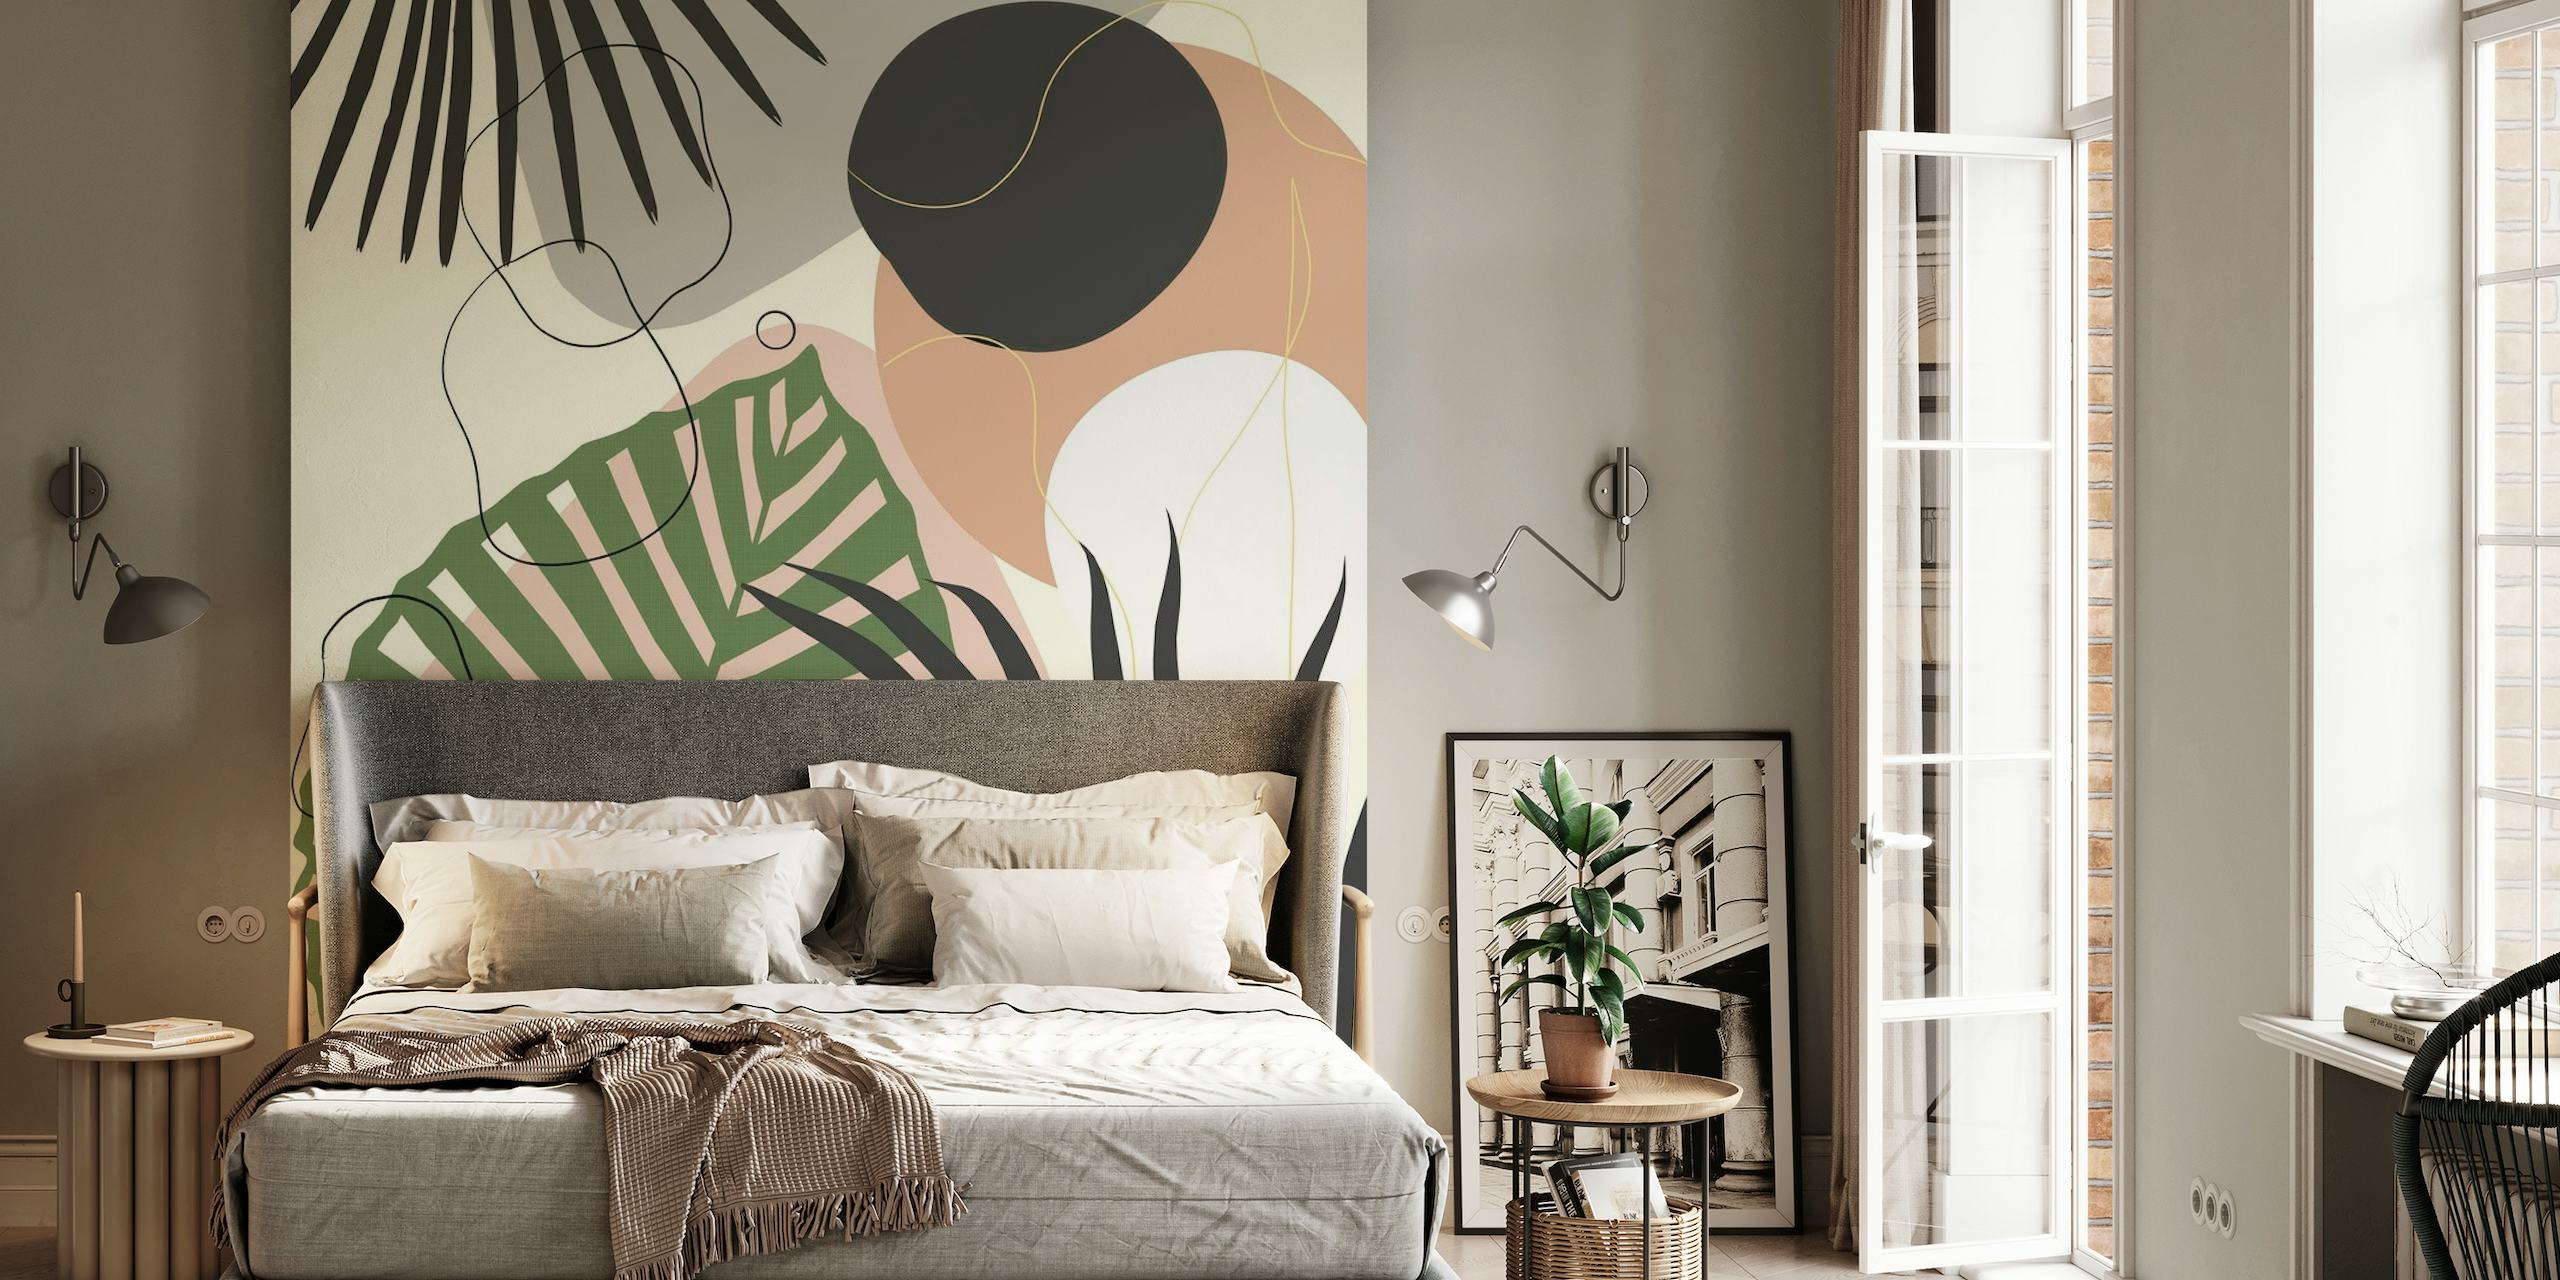 Stylized illustration of jungle leaves in muted earth tones for wall mural